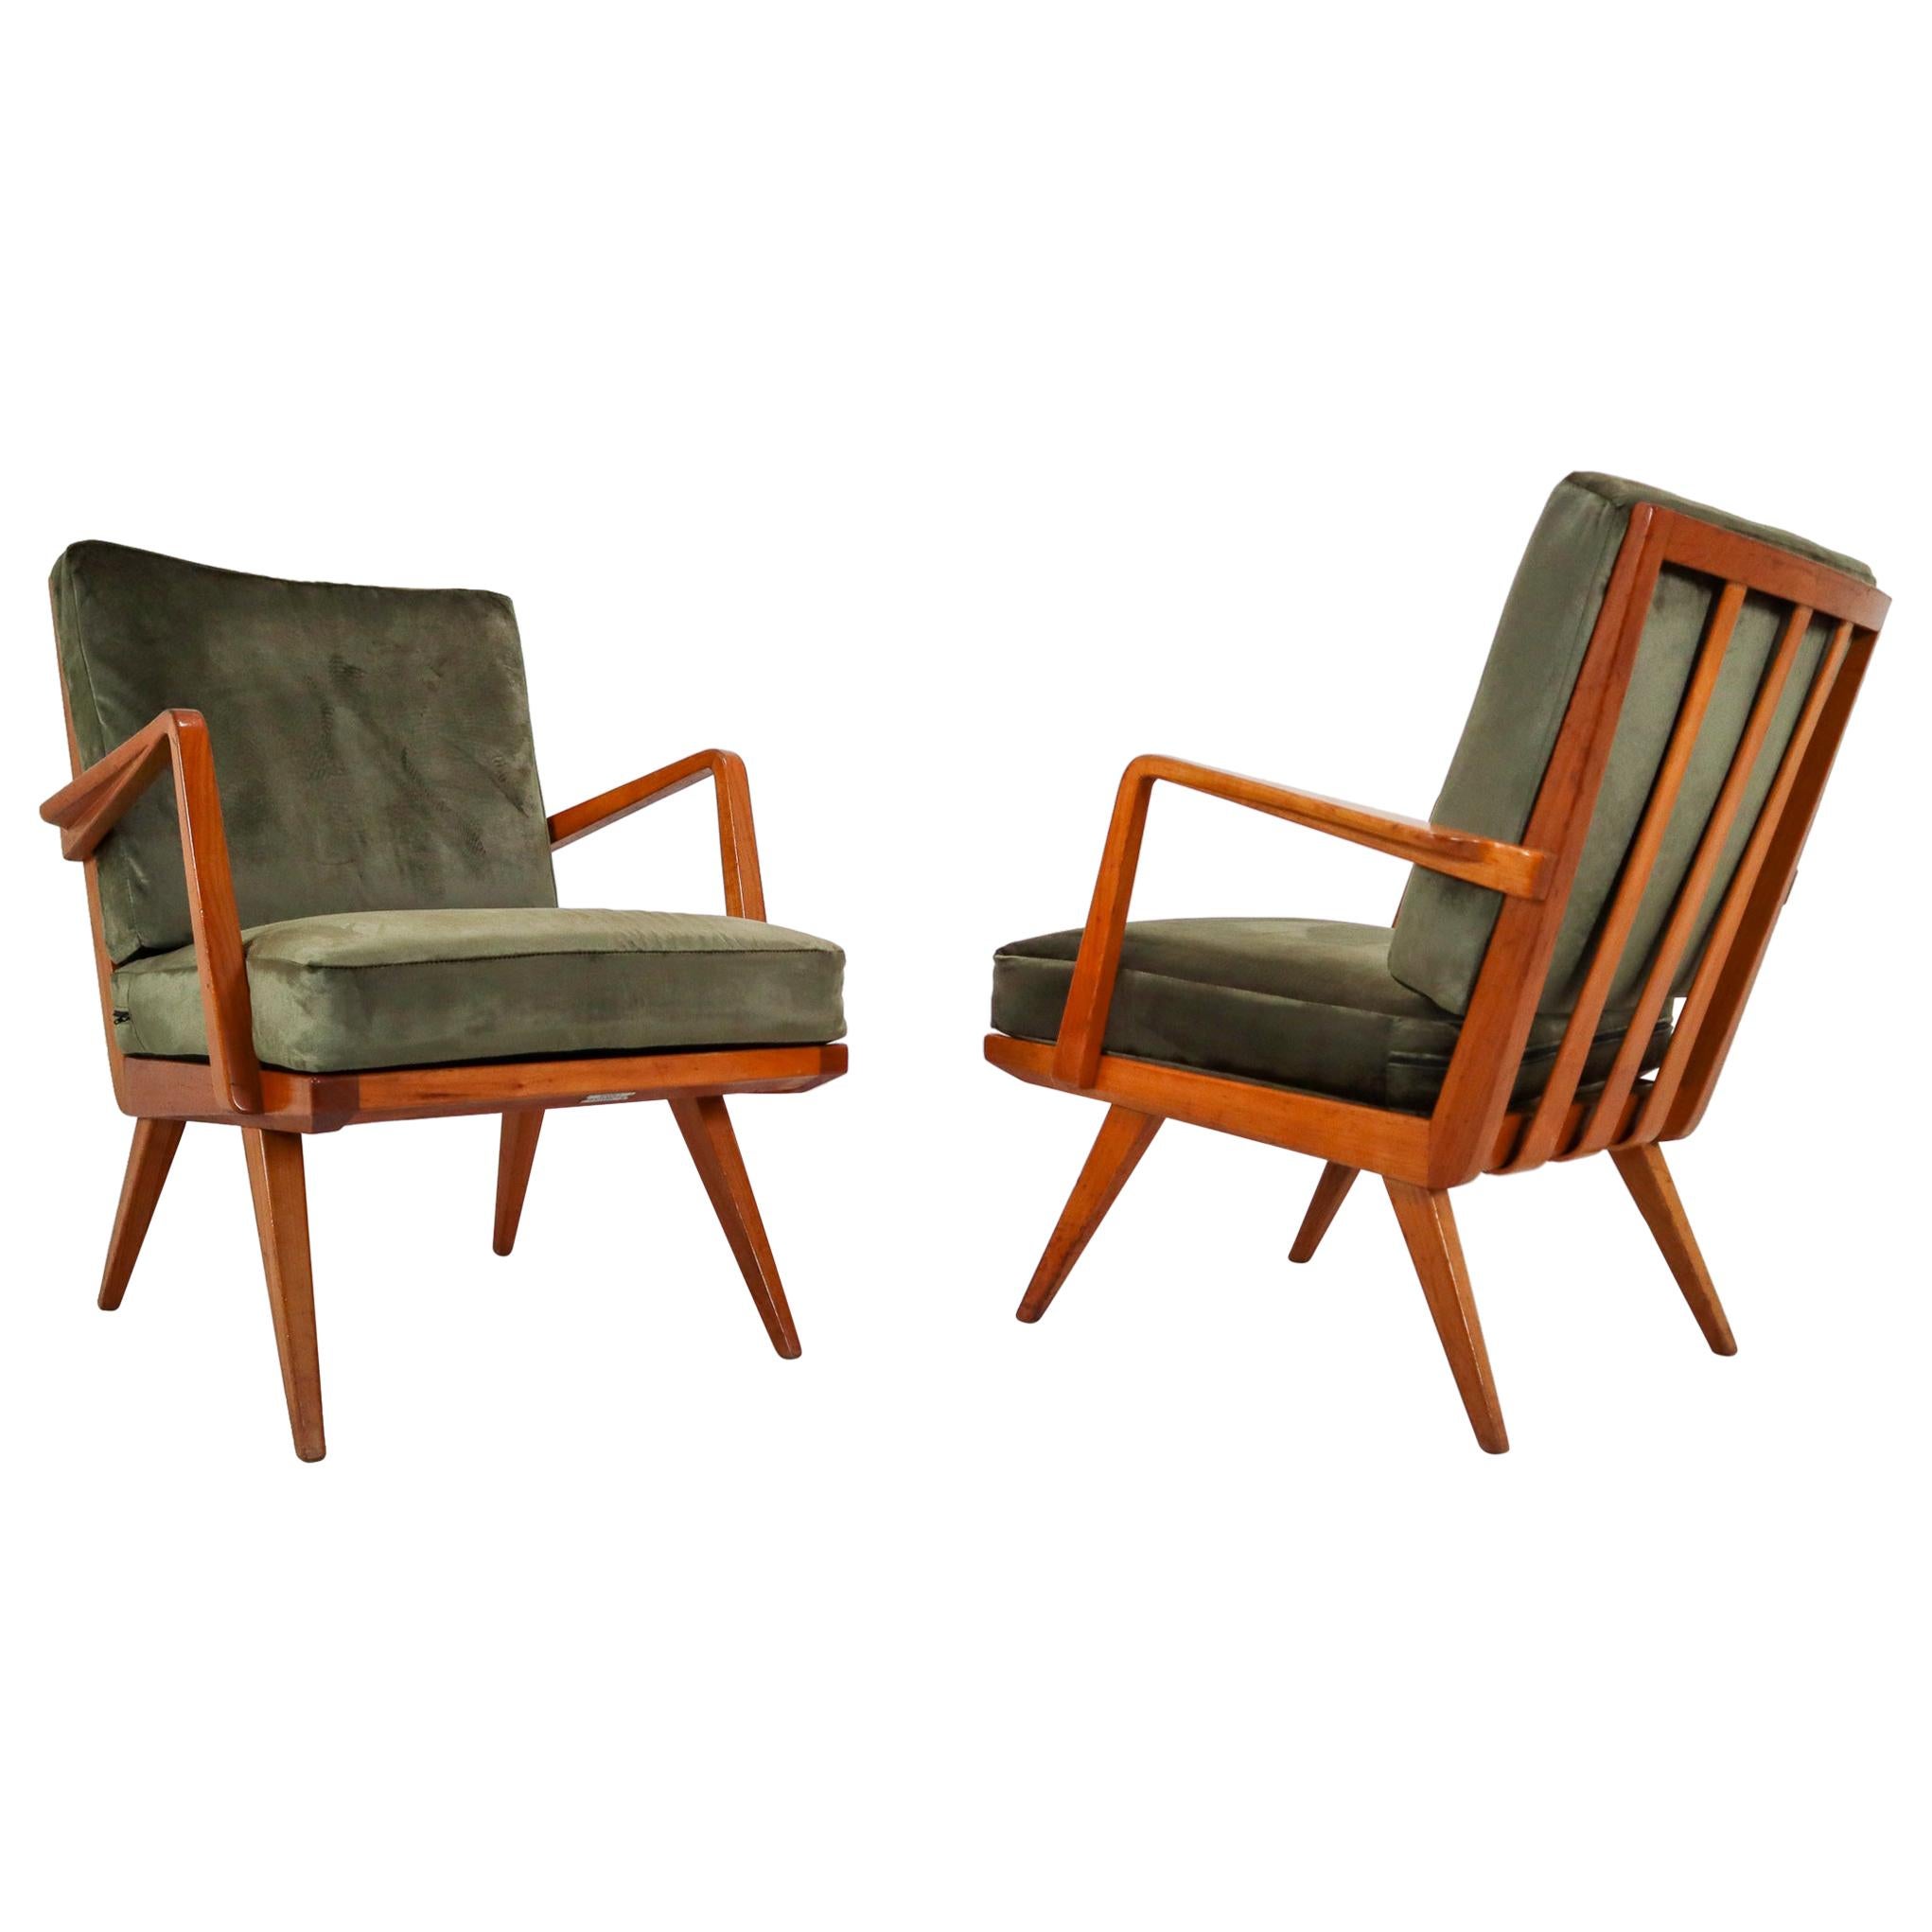 Midcentury Cherry Armchairs Designed by Walter Knoll "Antimott", Germany, 1950s